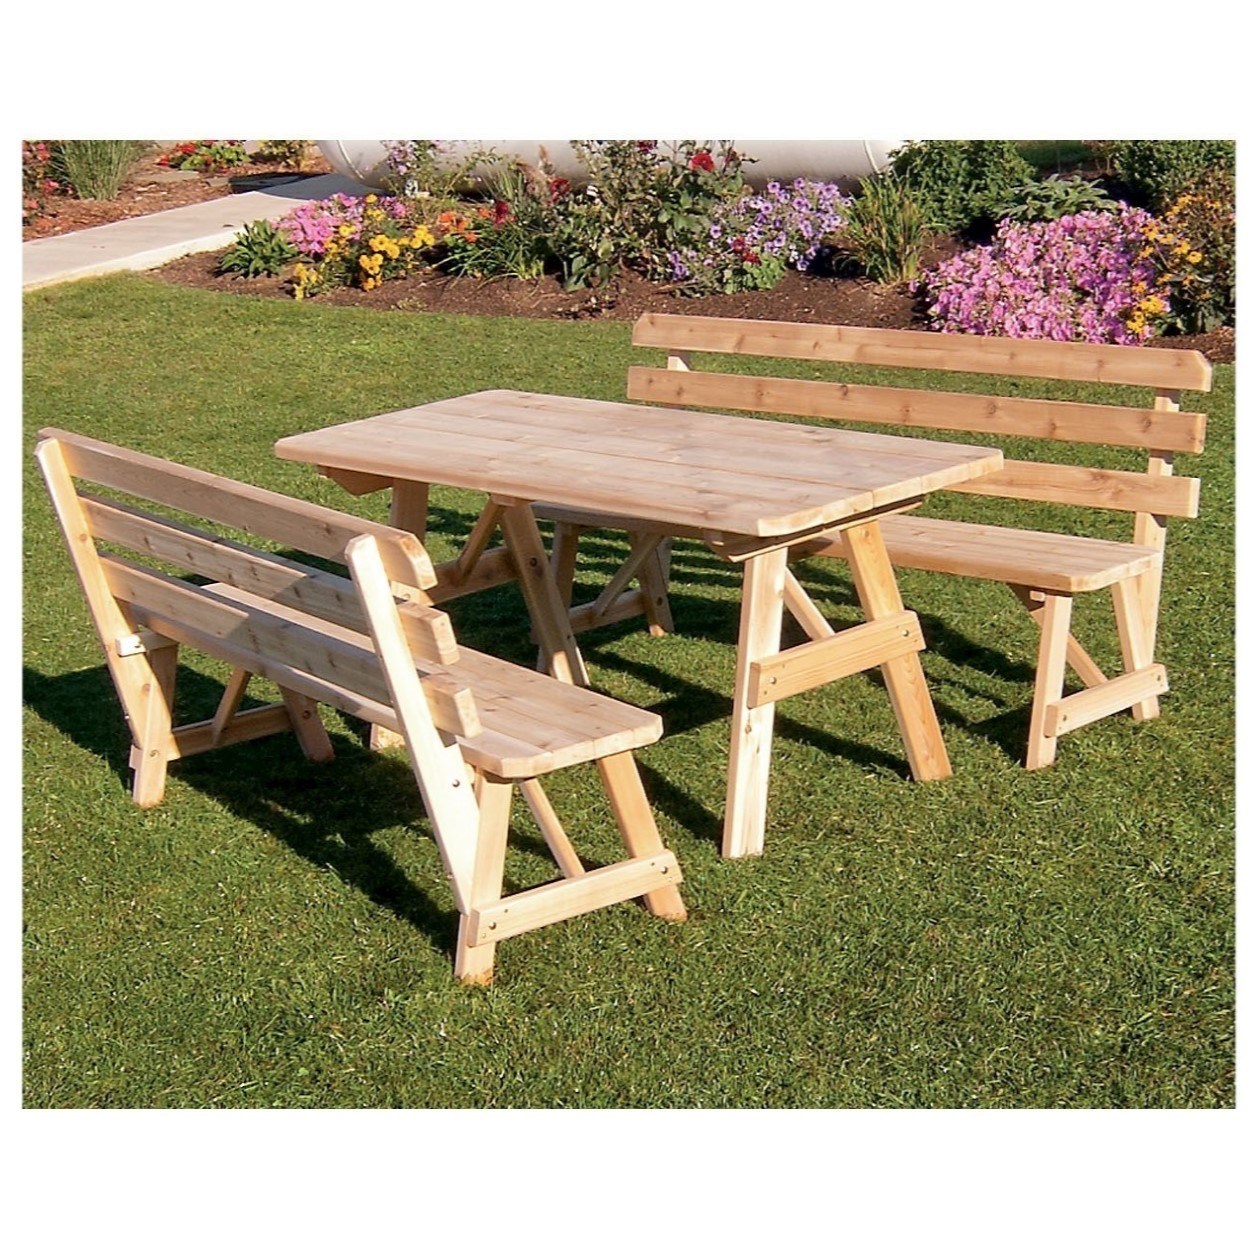 A & L Furniture Yellow Pine Traditional Picnic Table with 2 Umbrella Hole Black 5 